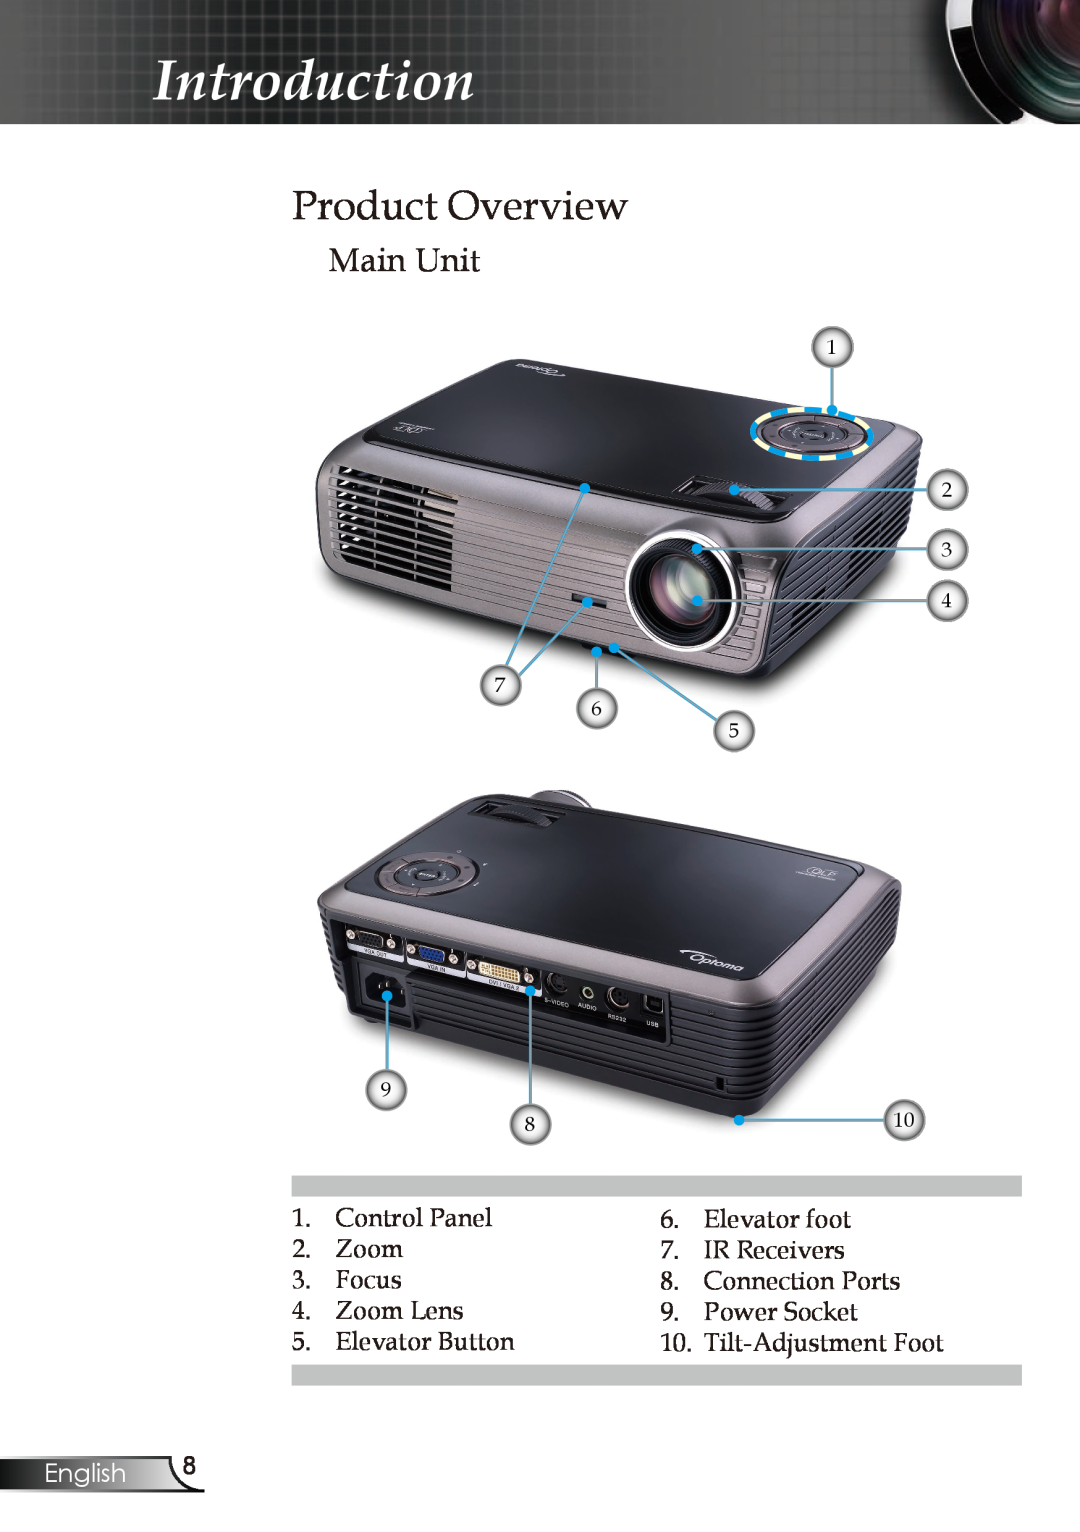 Optoma Technology EP728, EP727, EP723, EP721 manual Product Overview, Main Unit, Introduction, English 